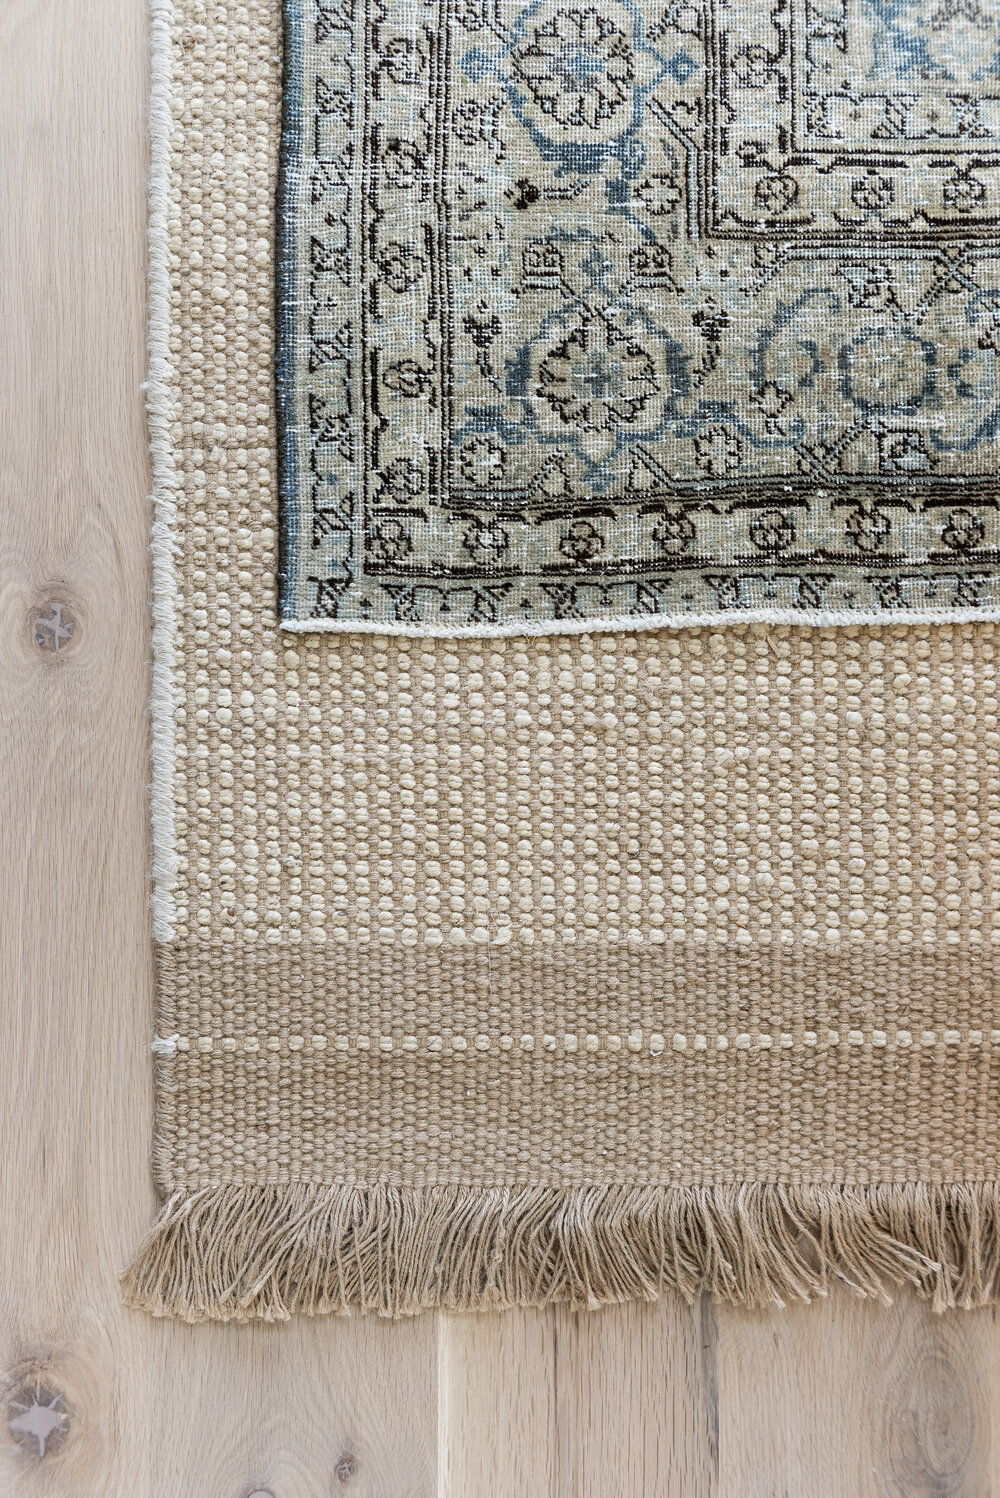 How to Layer Your Rugs